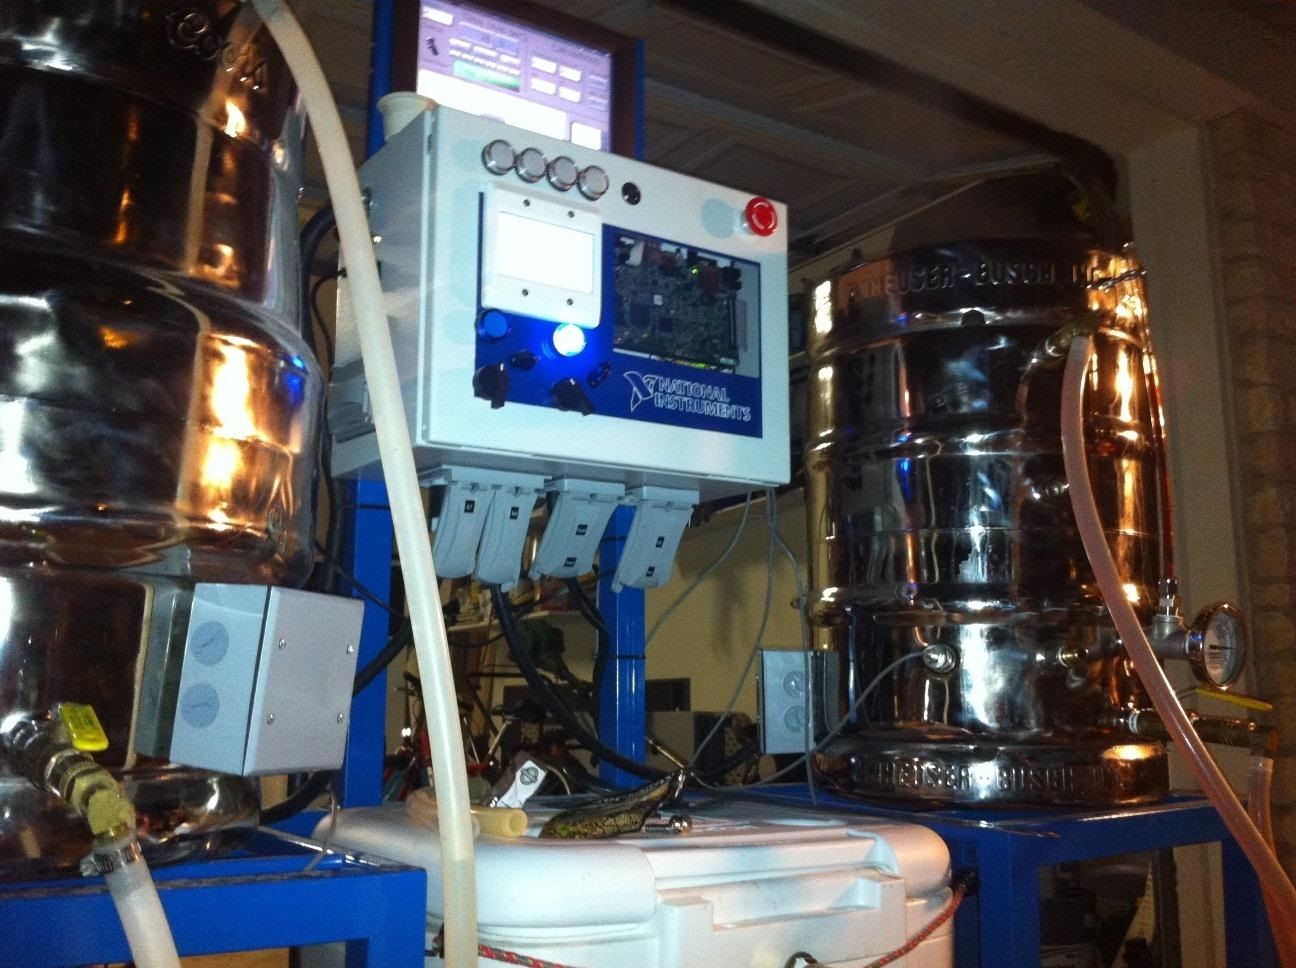 This May Be the Most Meticulous Home-Brewing System Ever Built